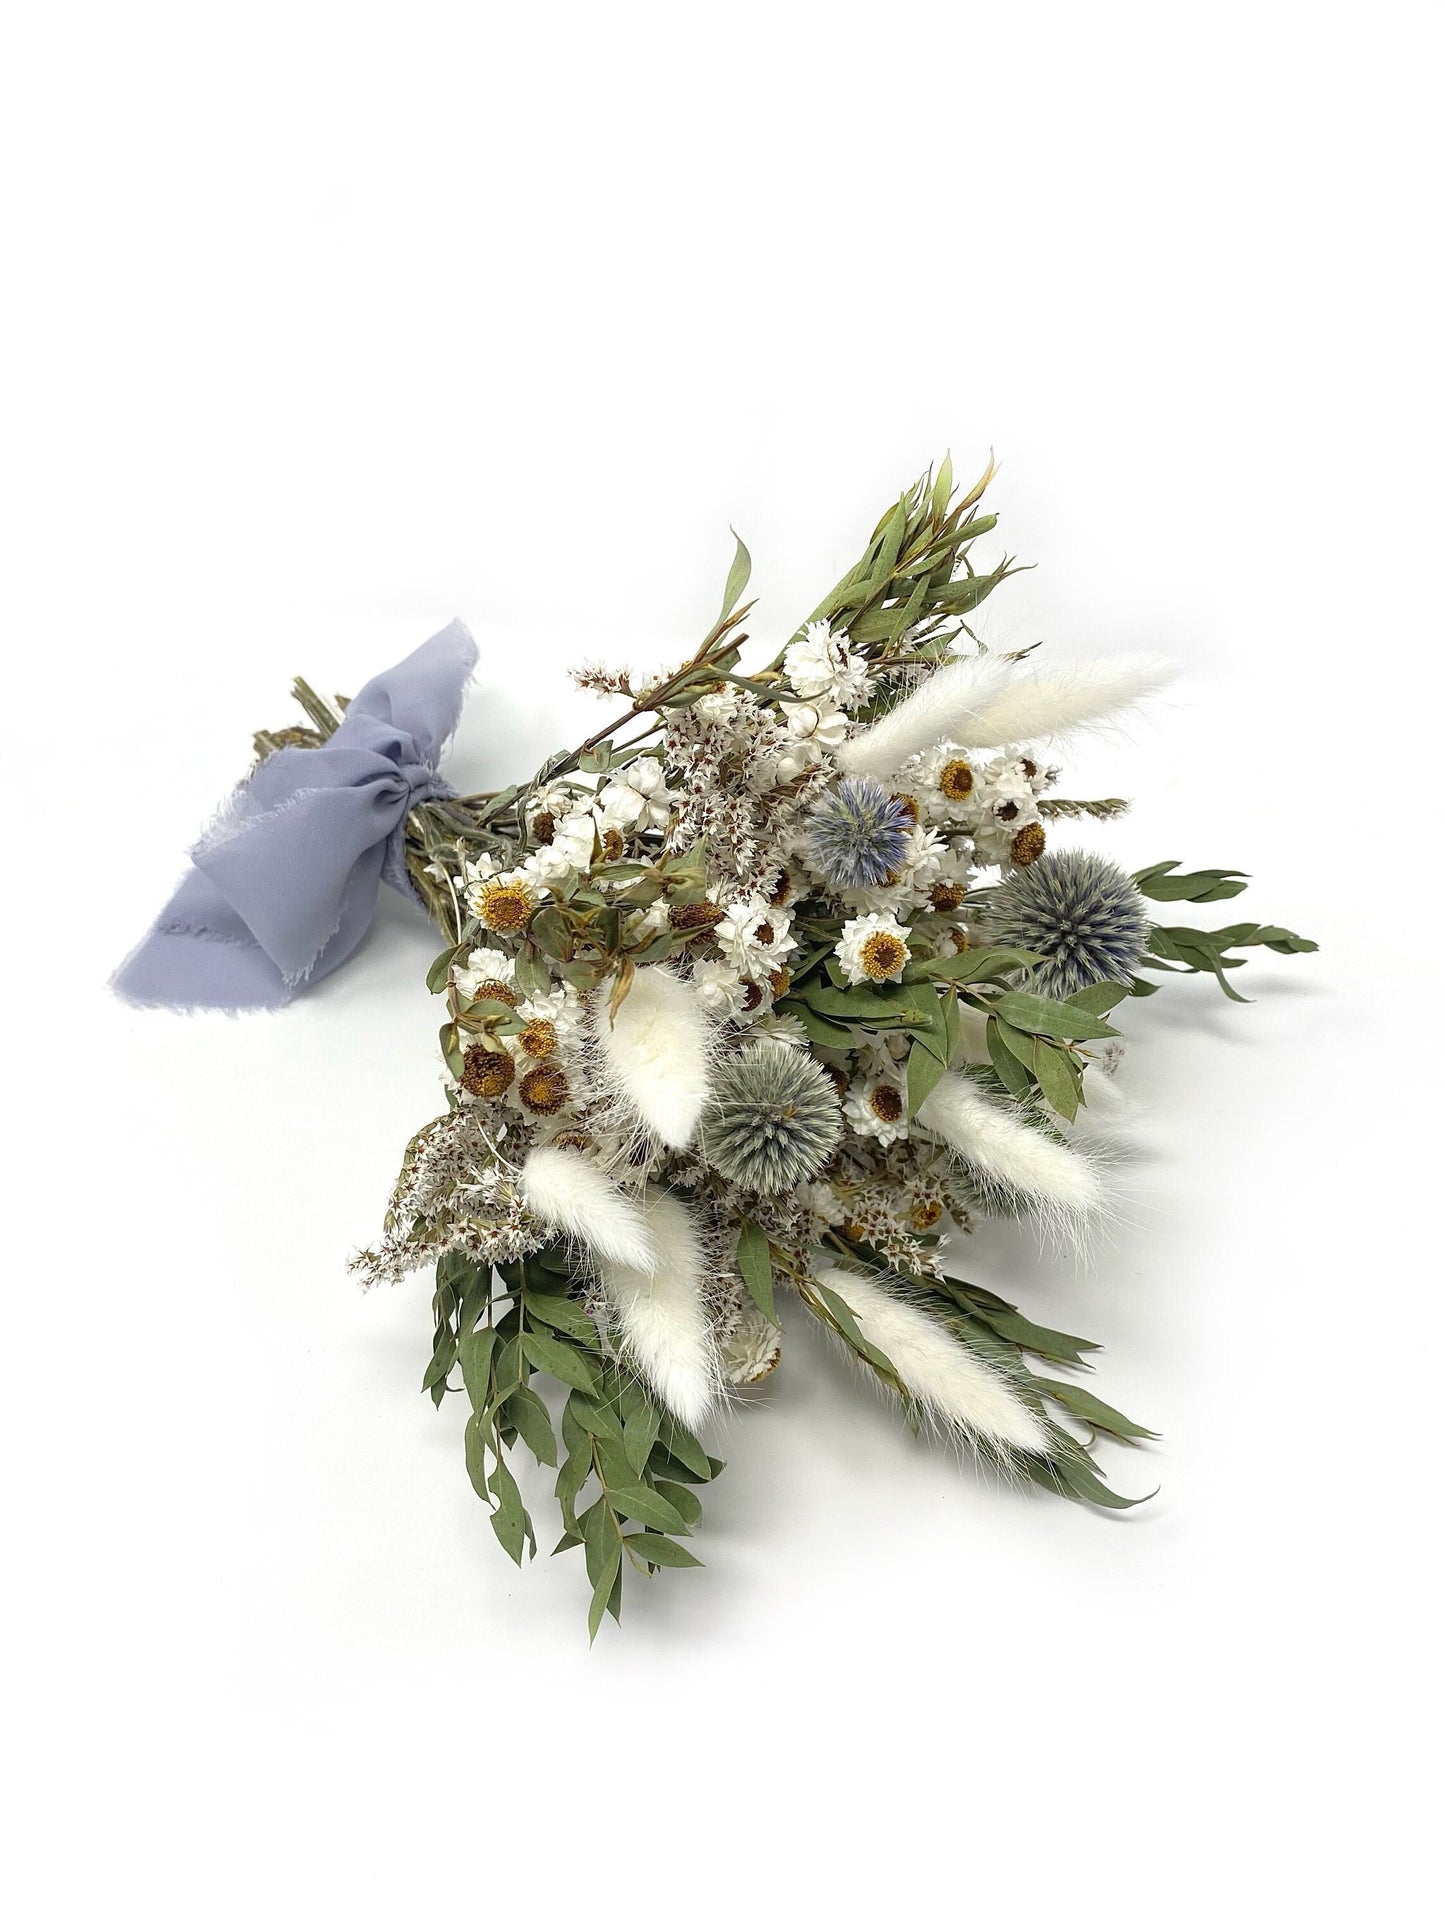 Wedding Bouquet, Dried Flowers, Preserved Floral, Rustic, Ammobium, bunny tails, Bridal, Winter, Throw Bouquet, Spring, Blue and White